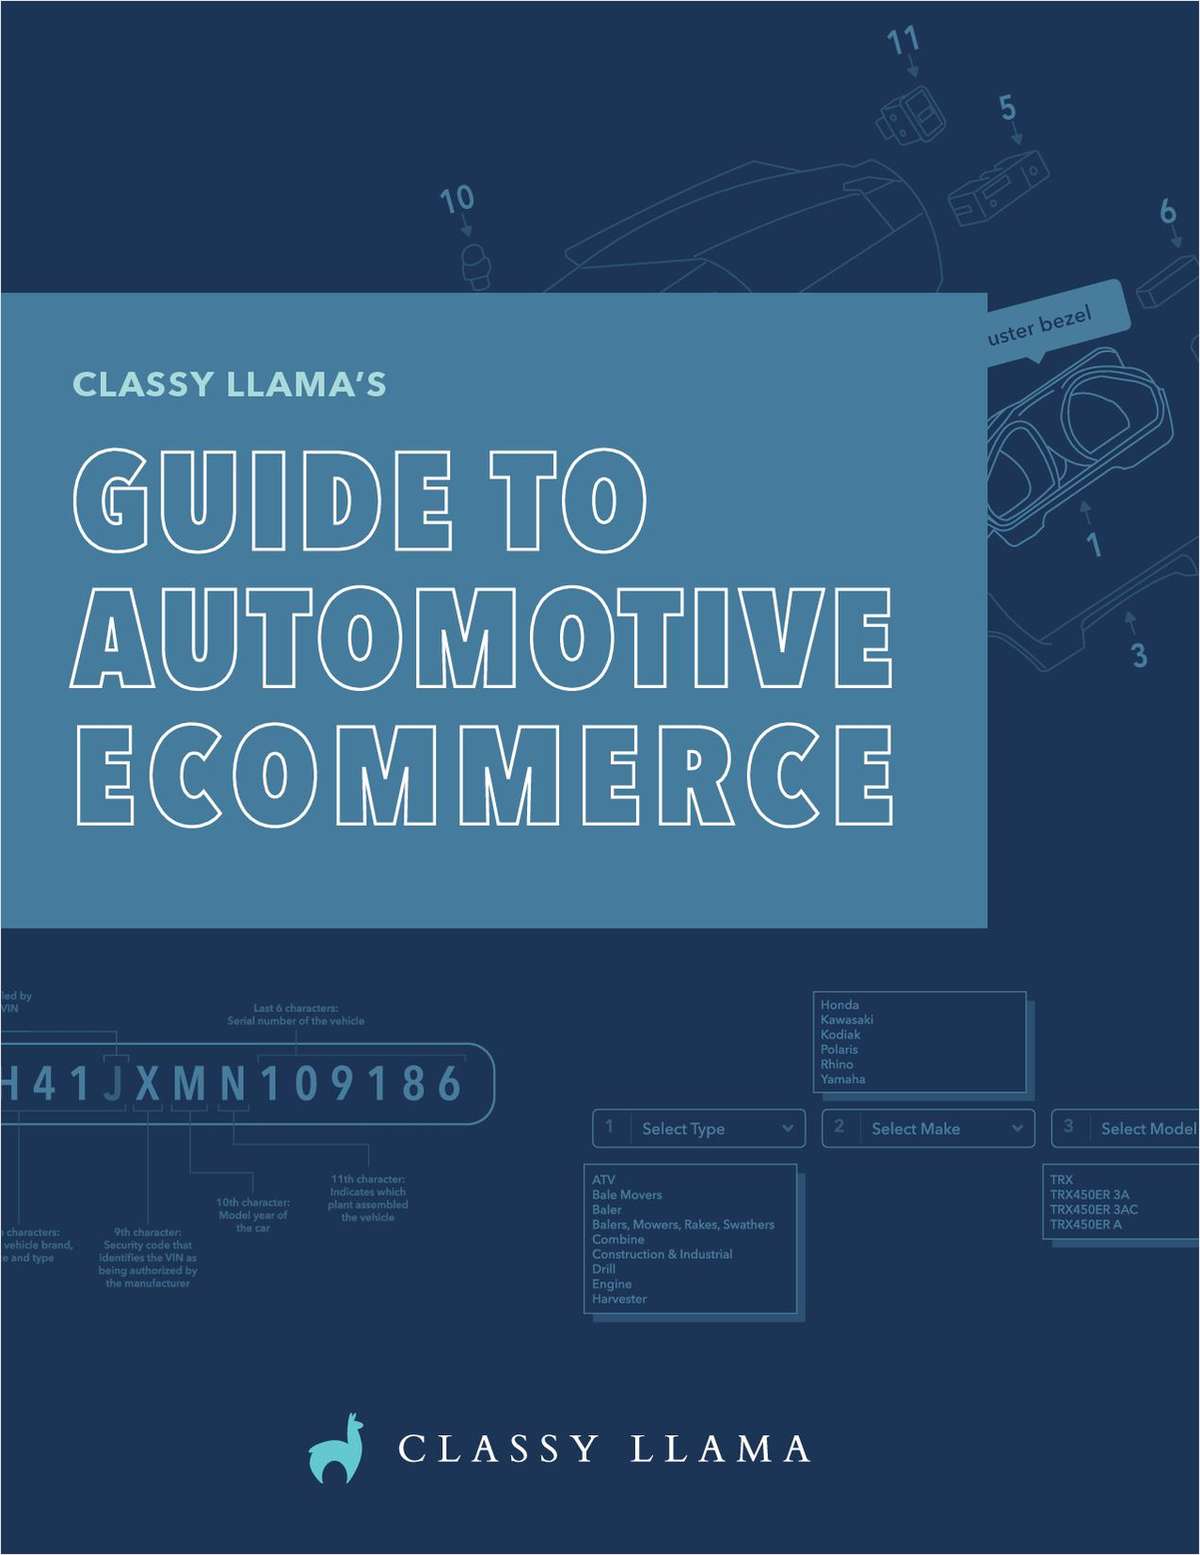 Guide to Automotive eCommerce